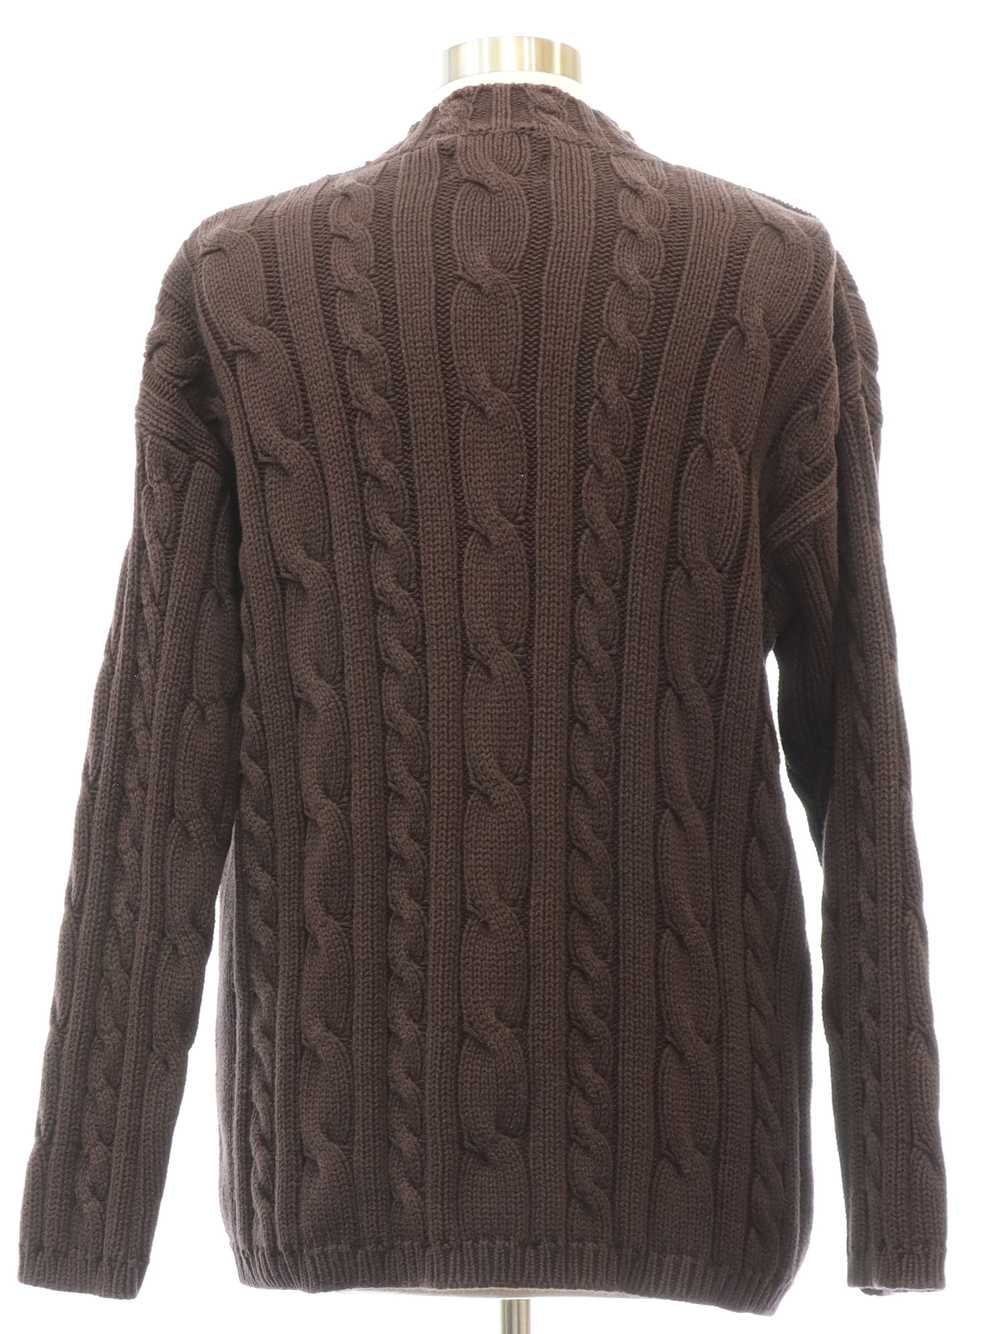 1980's Westbound Casuals Womens Cable Knit Sweater - image 3